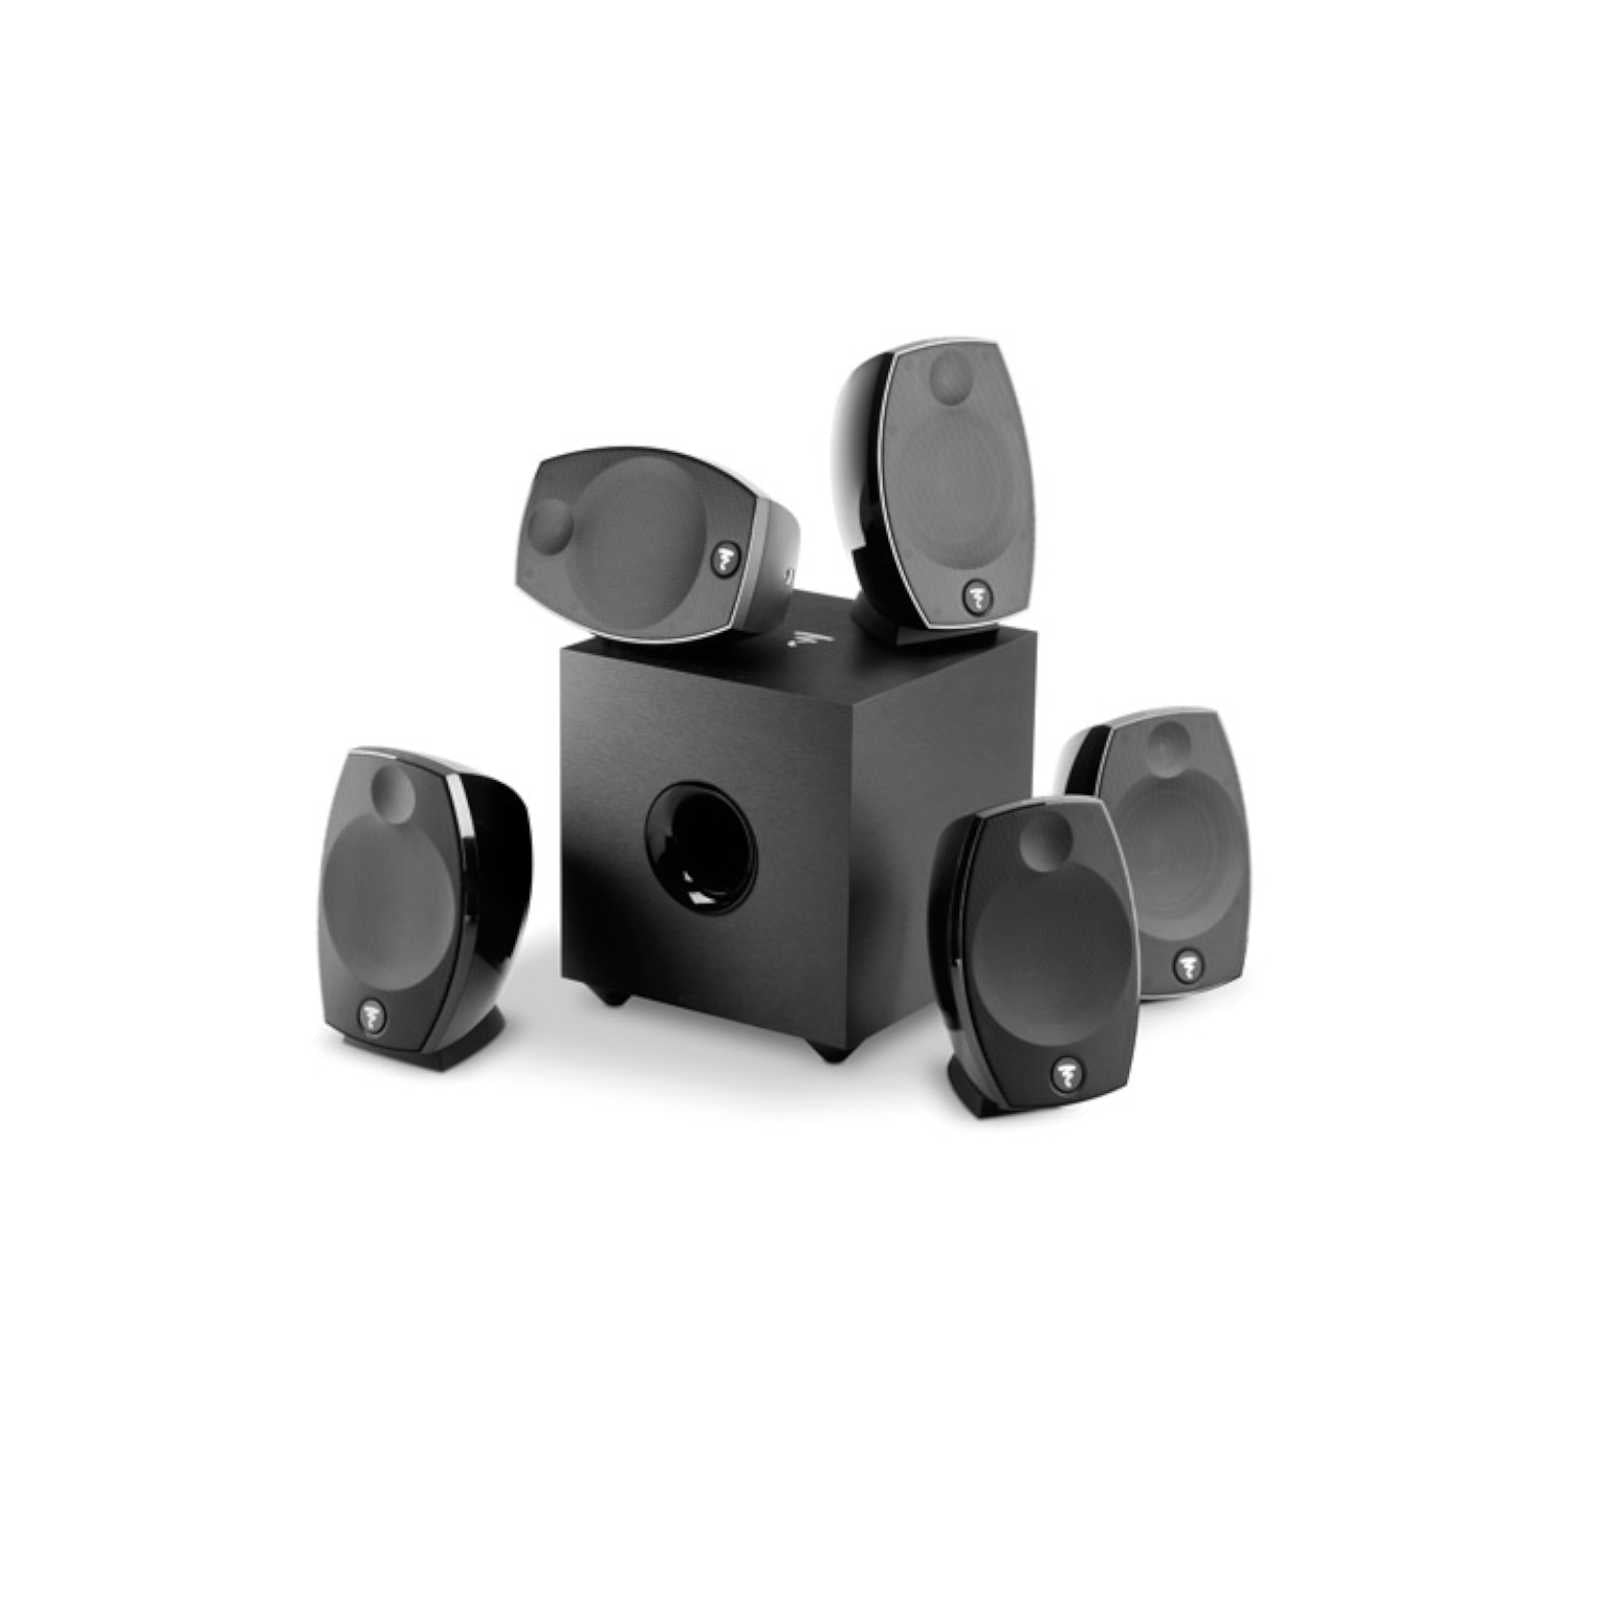 Focal SIB EVO 5.1 Home Theater System -  Ooberpad